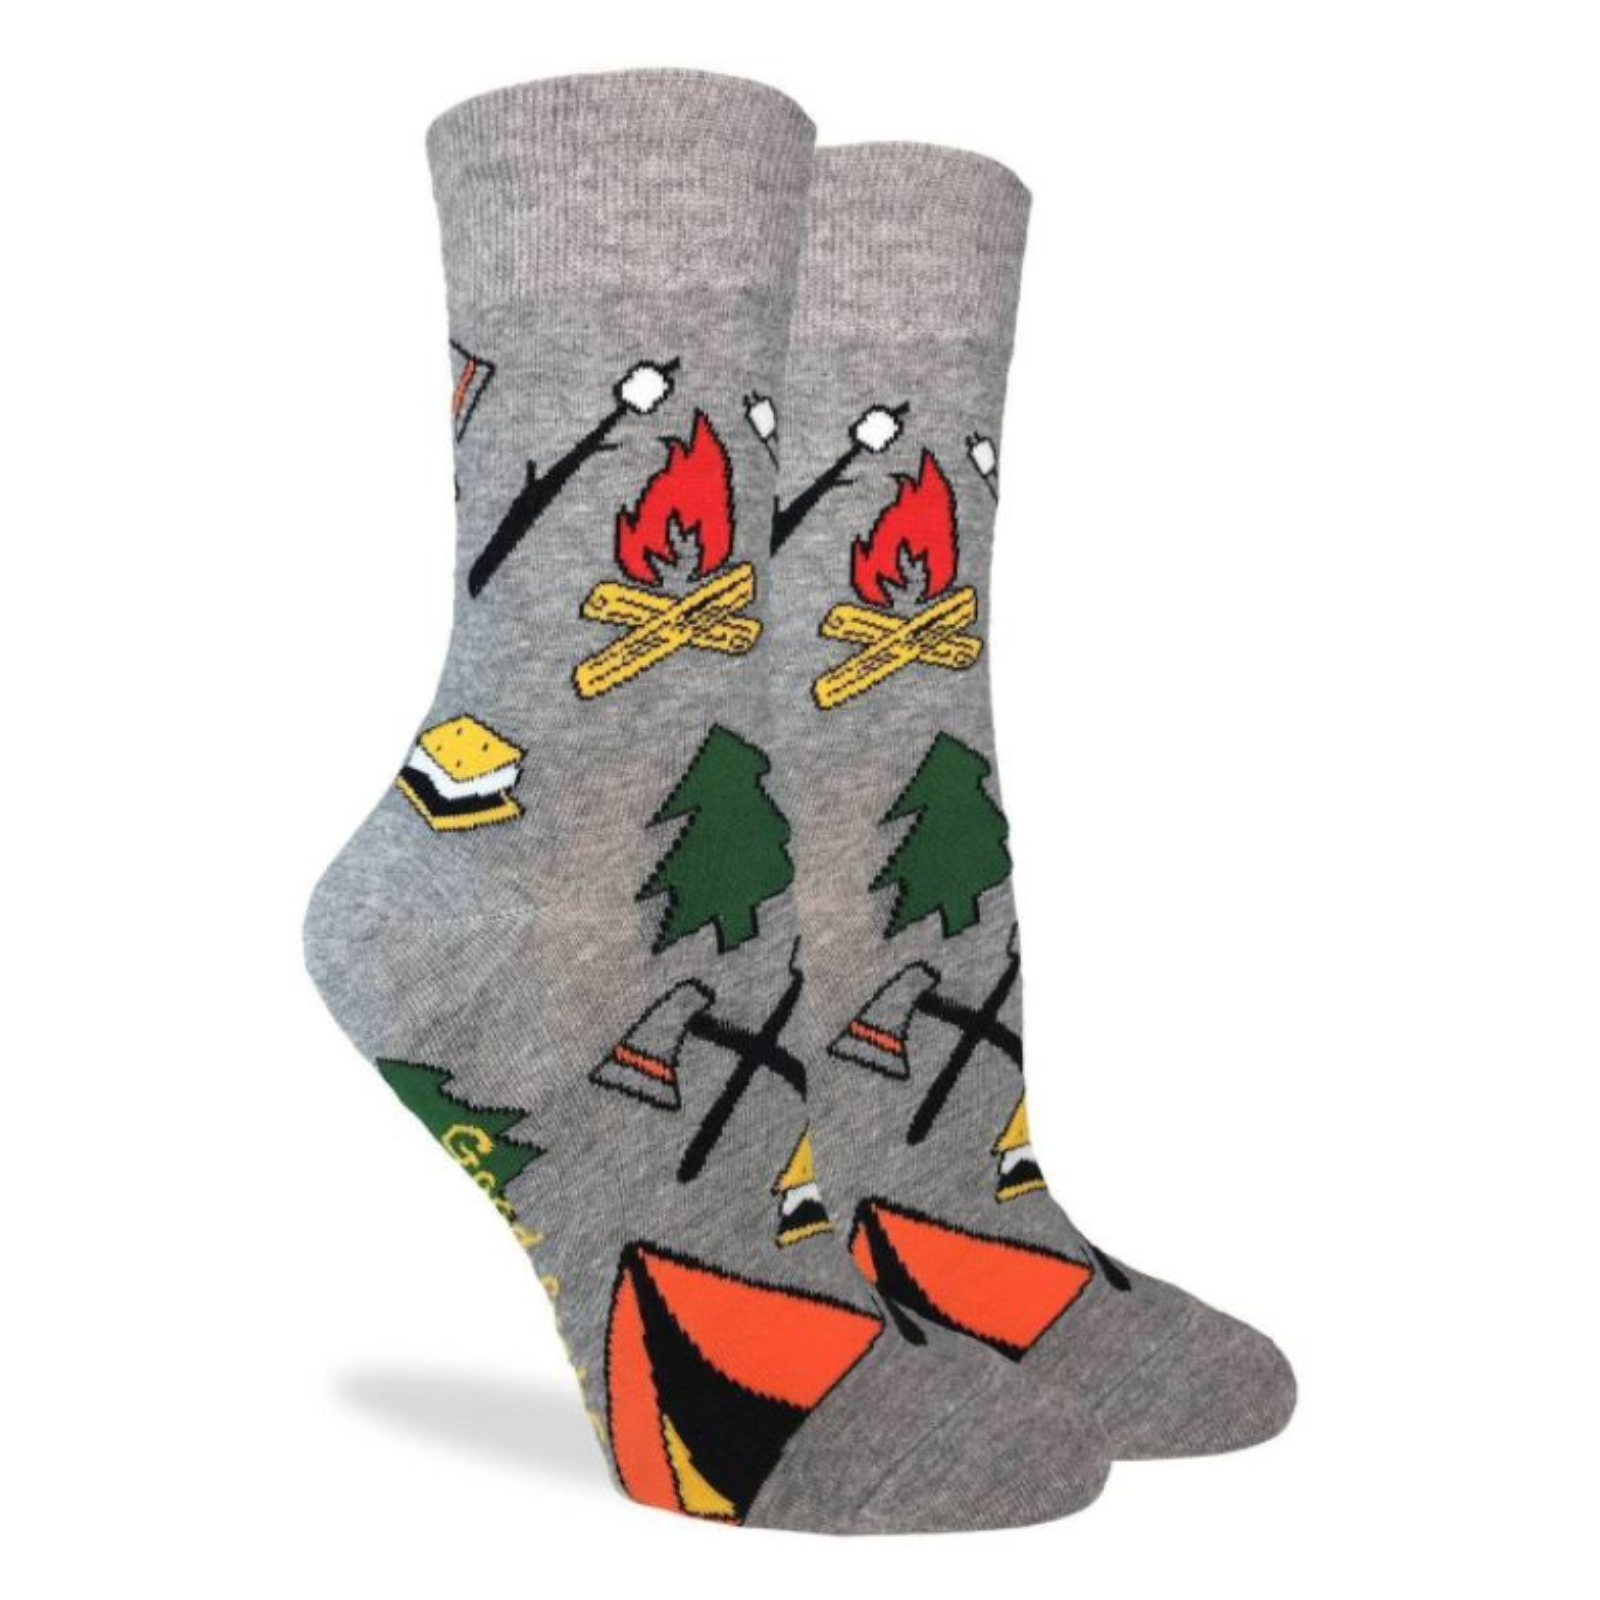 Good Luck Sock with images of Camping women's gray crew sock featuring tent, tree, smores, and campfire on display feet